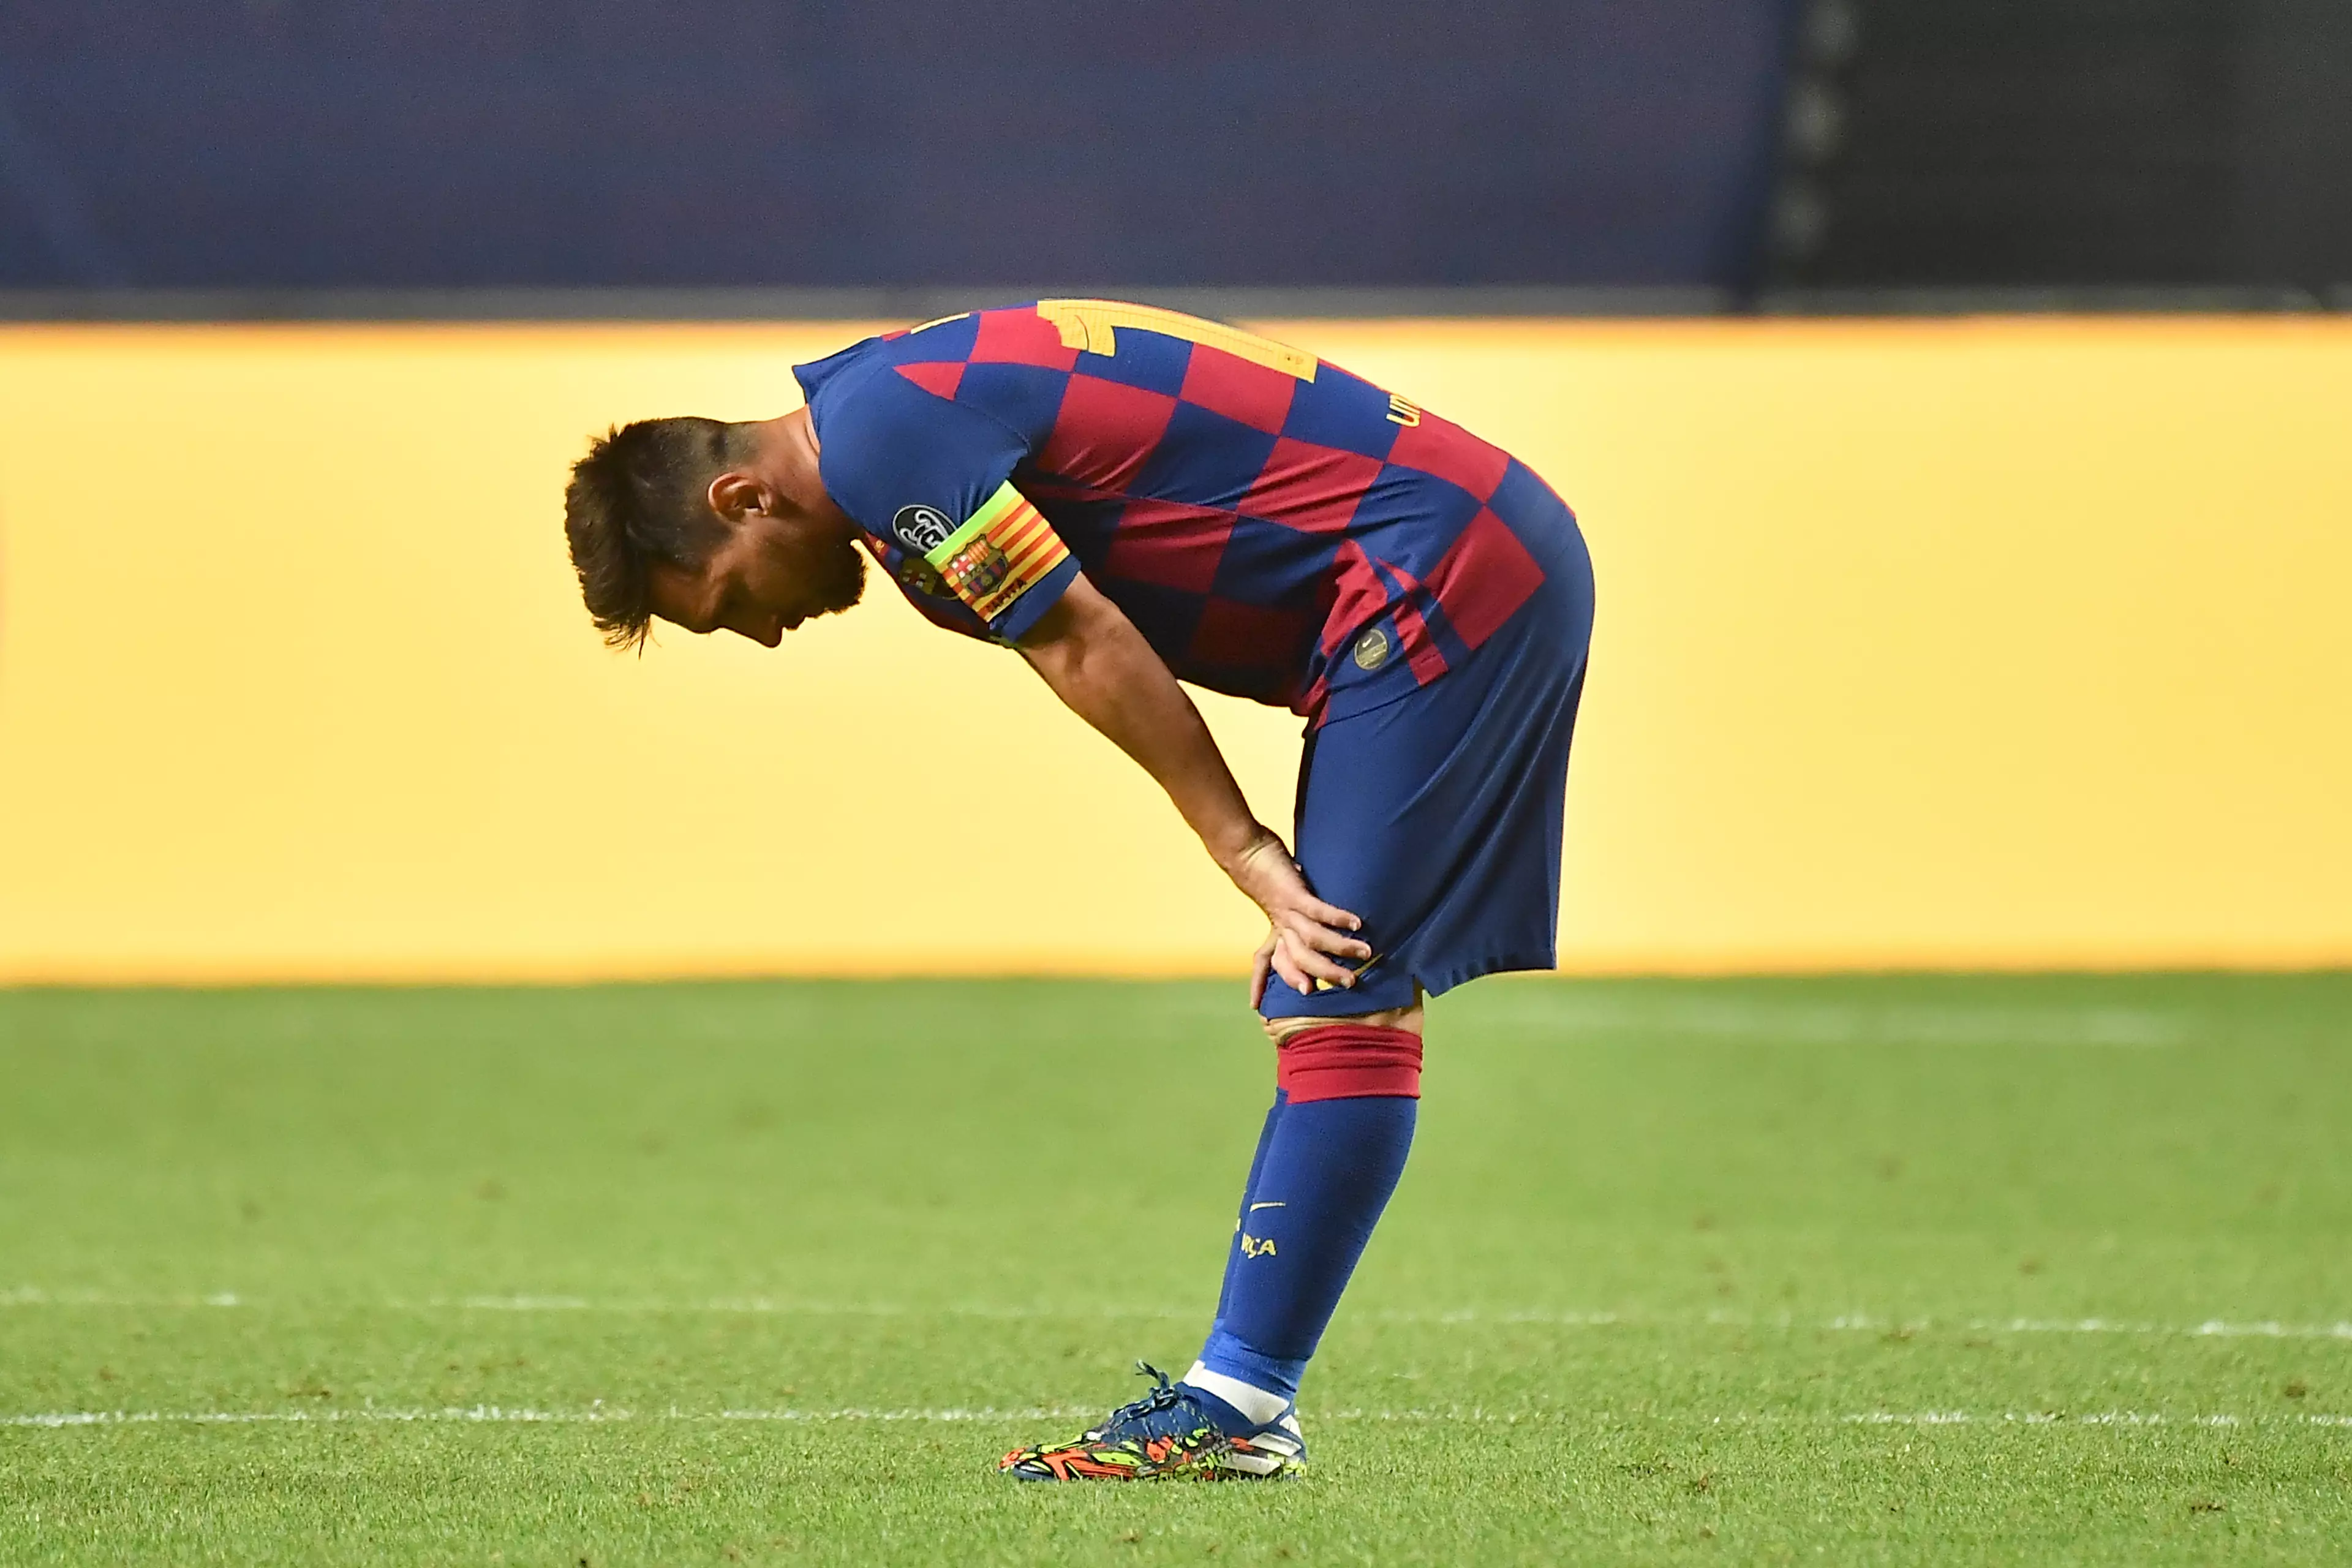 Messi at the end of the game. Image: PA Images